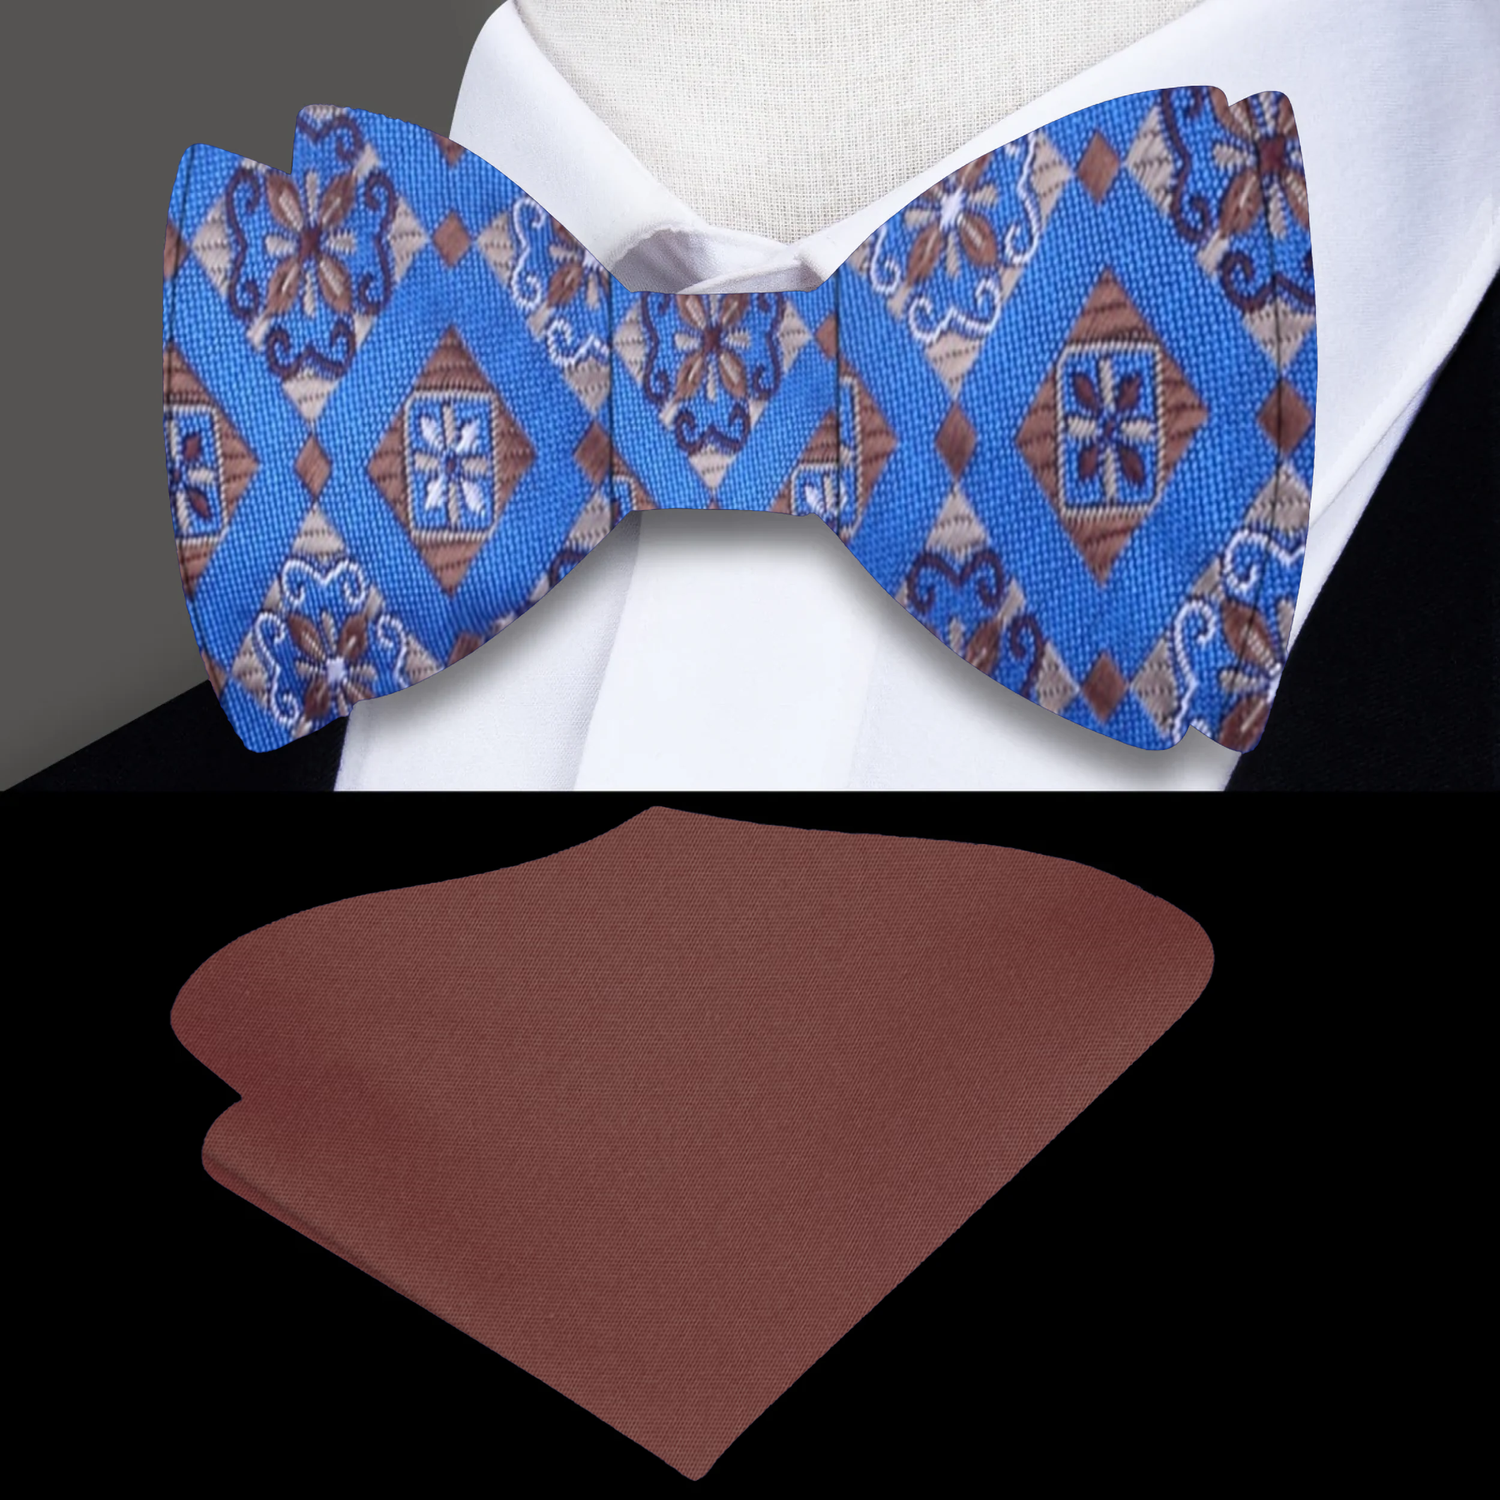 Main: Blue, Brown Geometric Bow Tie and Brown Square